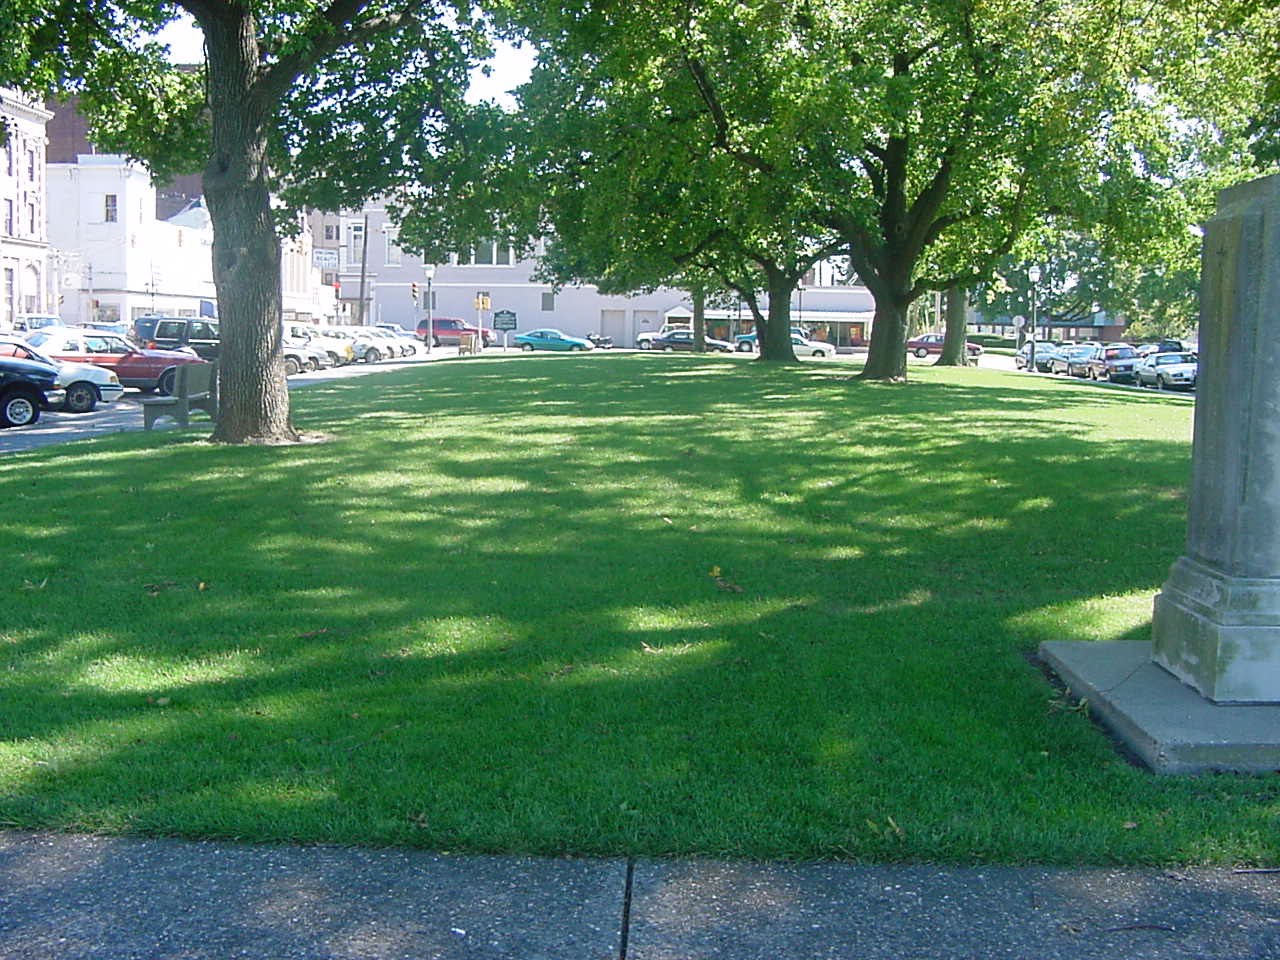 Patrick Henry Square in Vincennes, A lawn area bordered by sidewalk and roadways